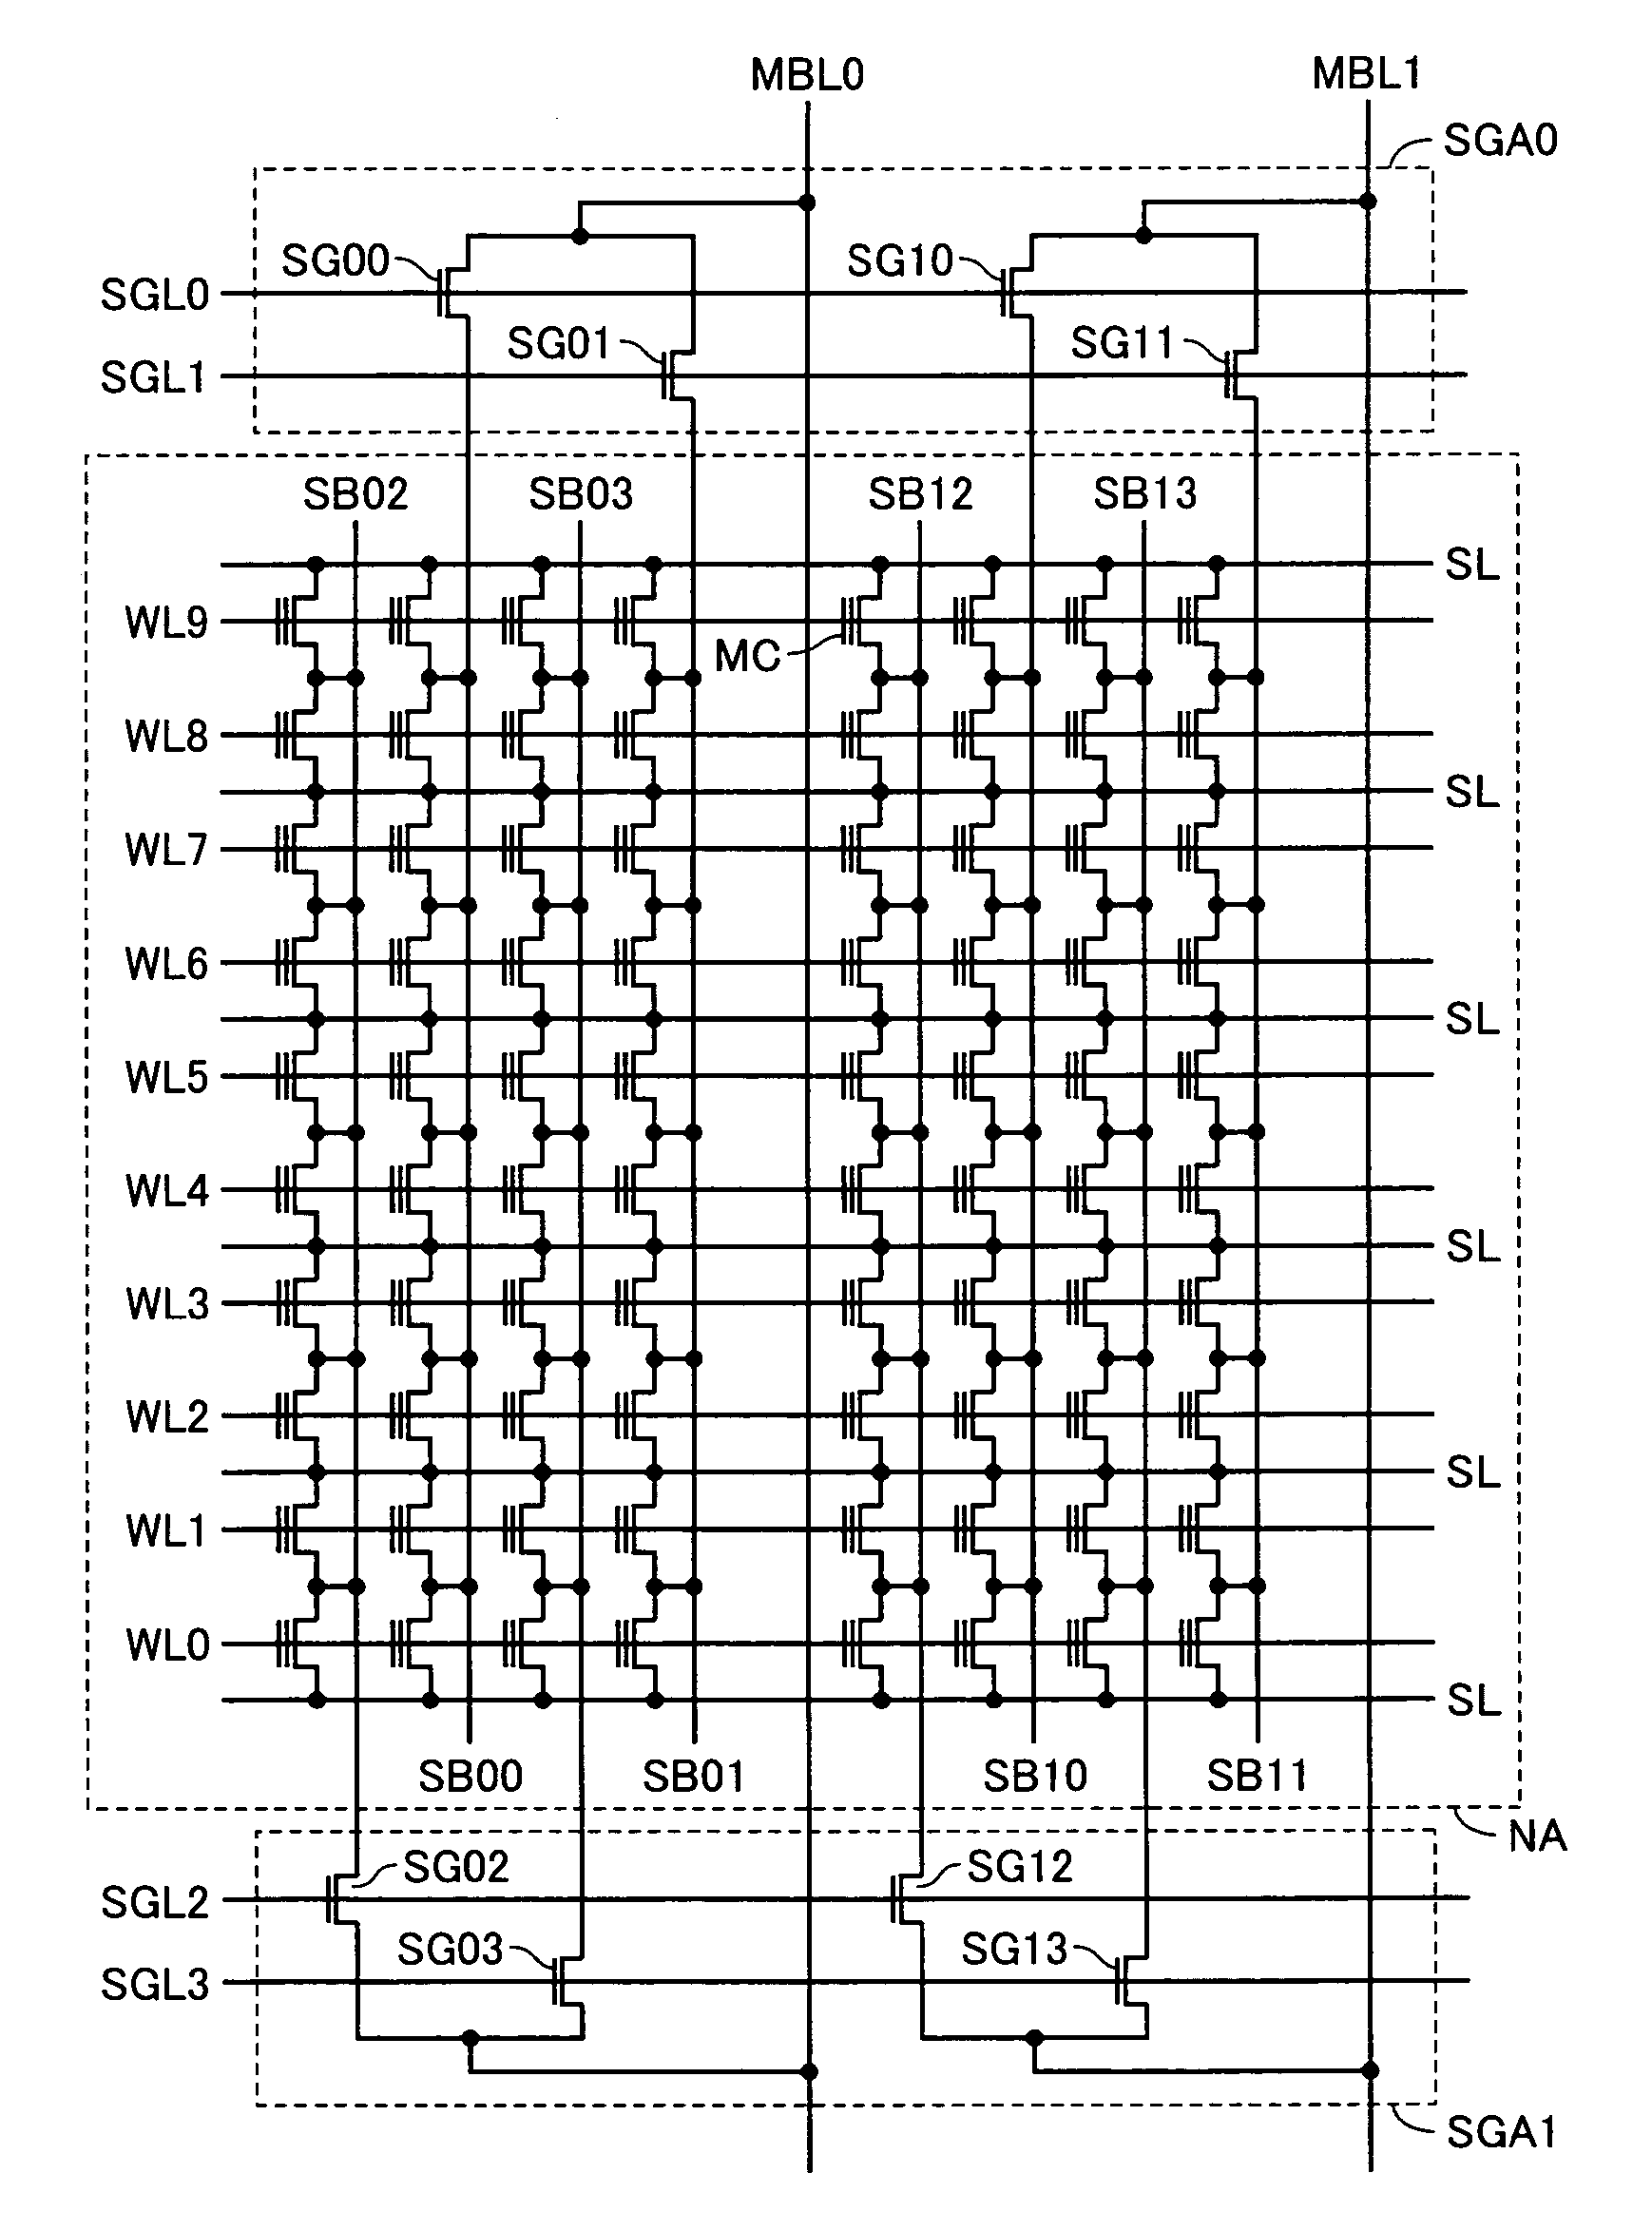 Nonvolatile semiconductor memory device including high efficiency and low cost redundant structure